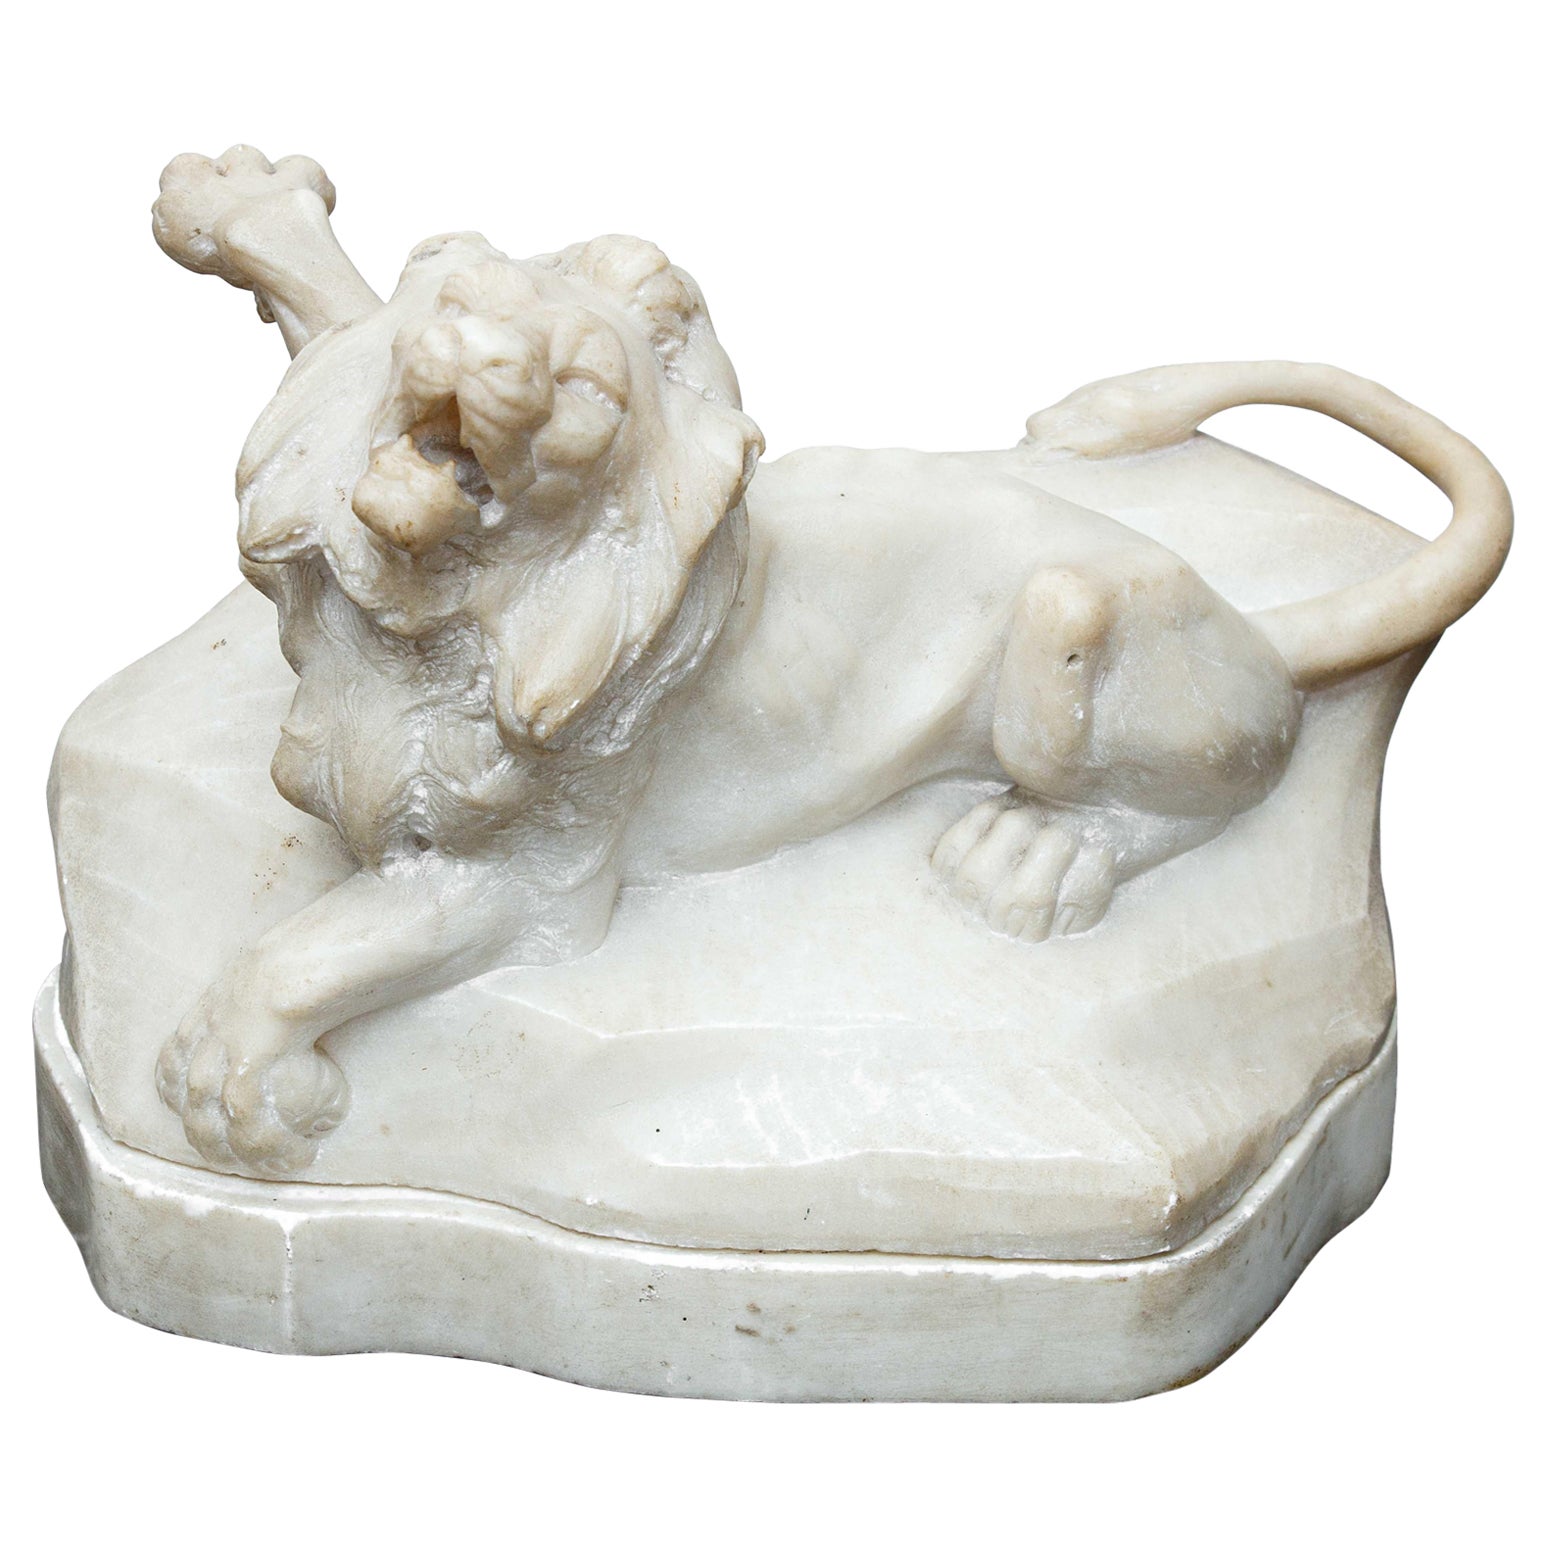 Lion Marble sculpture from the 17th century